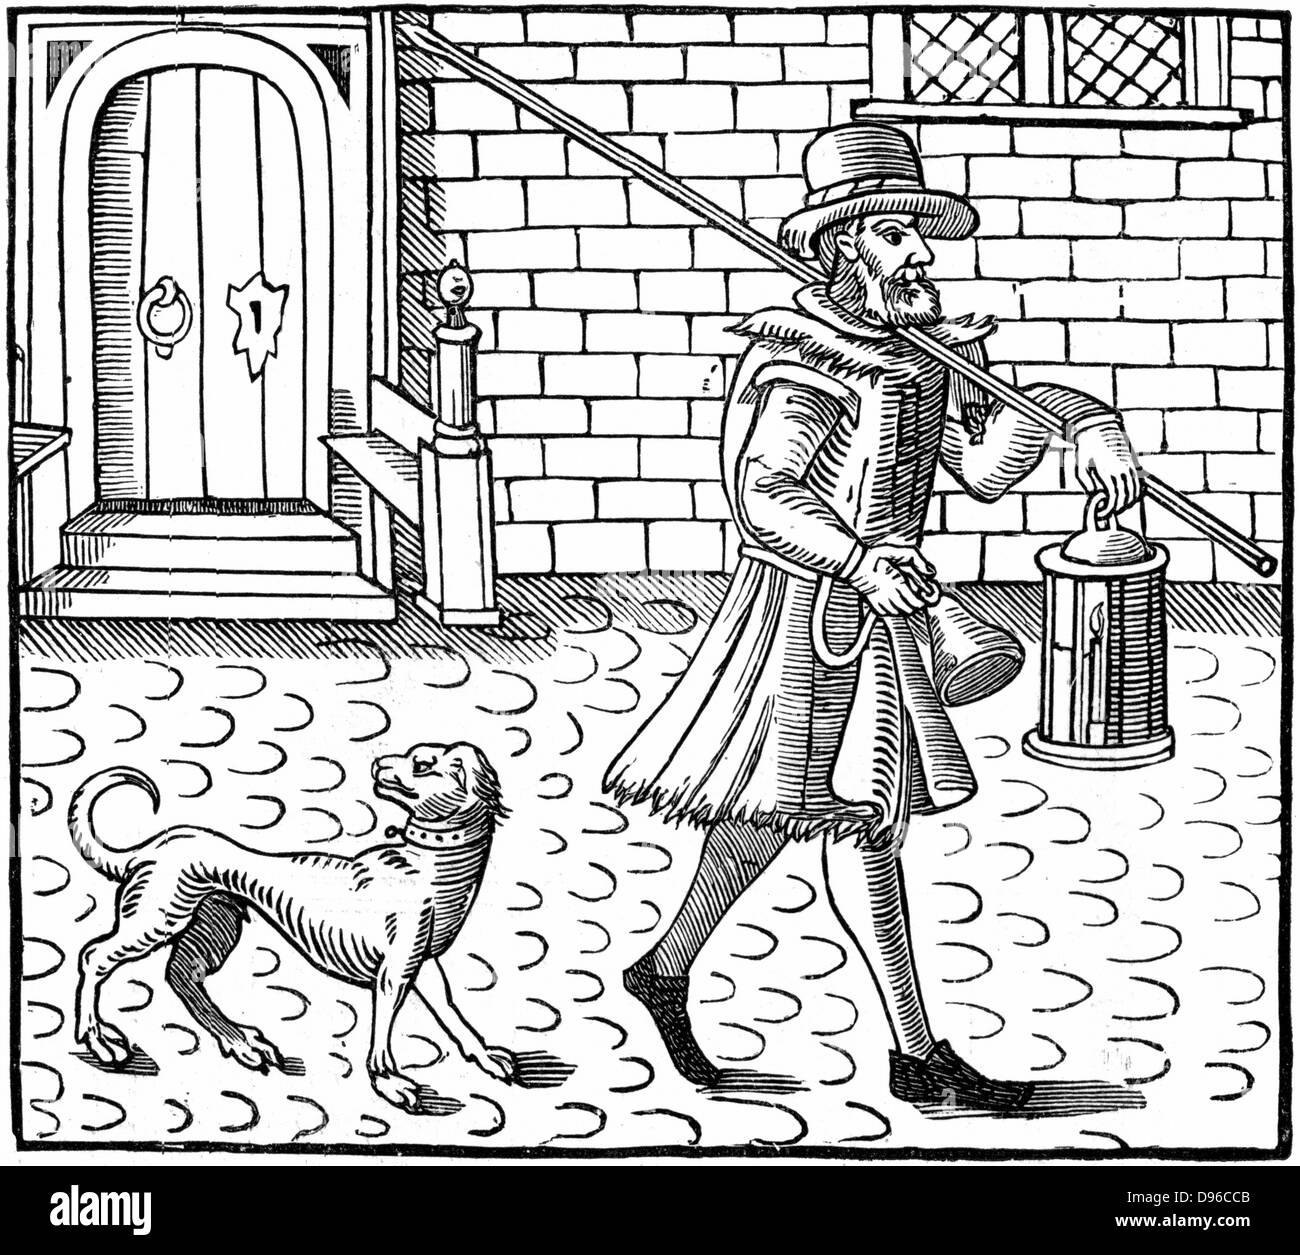 The Bellman of London: Title page of ballad in the Bagford Collection (British Museum) showing London night-watchman going on his rounds with bell, lantern and pike, with his dog at his heels. Such a figure would have been a familiar one in late 16th and early 17th century cities. Woodcut 1616 . Stock Photo